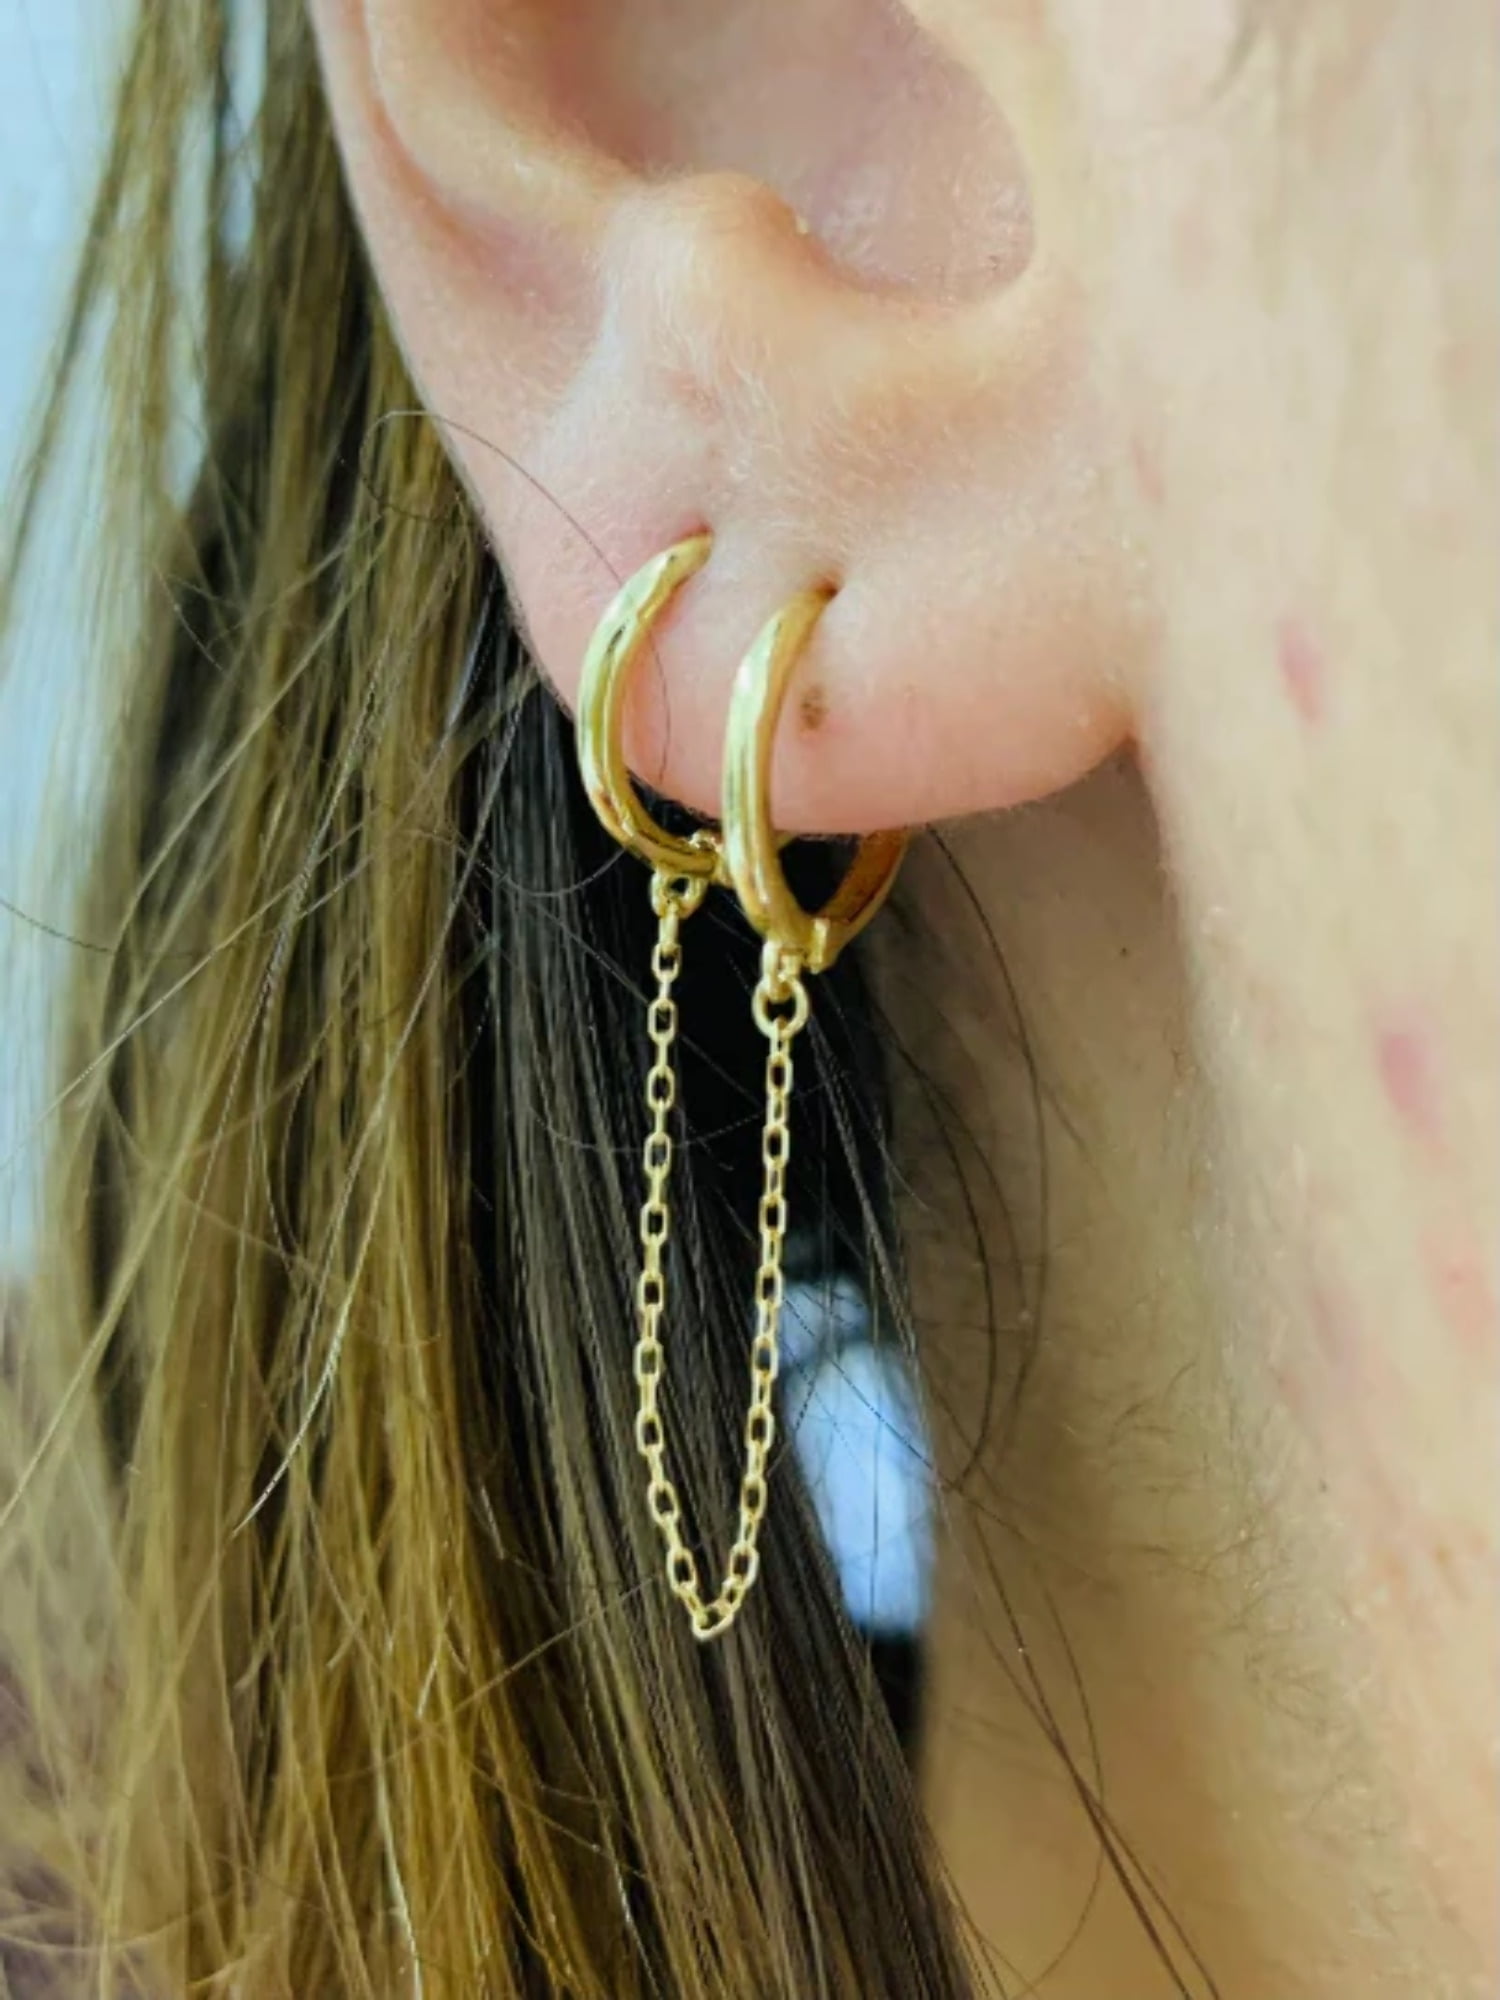 Double Piercing Earrings, Multiple Piercing Connected Earrings with Chain Gold